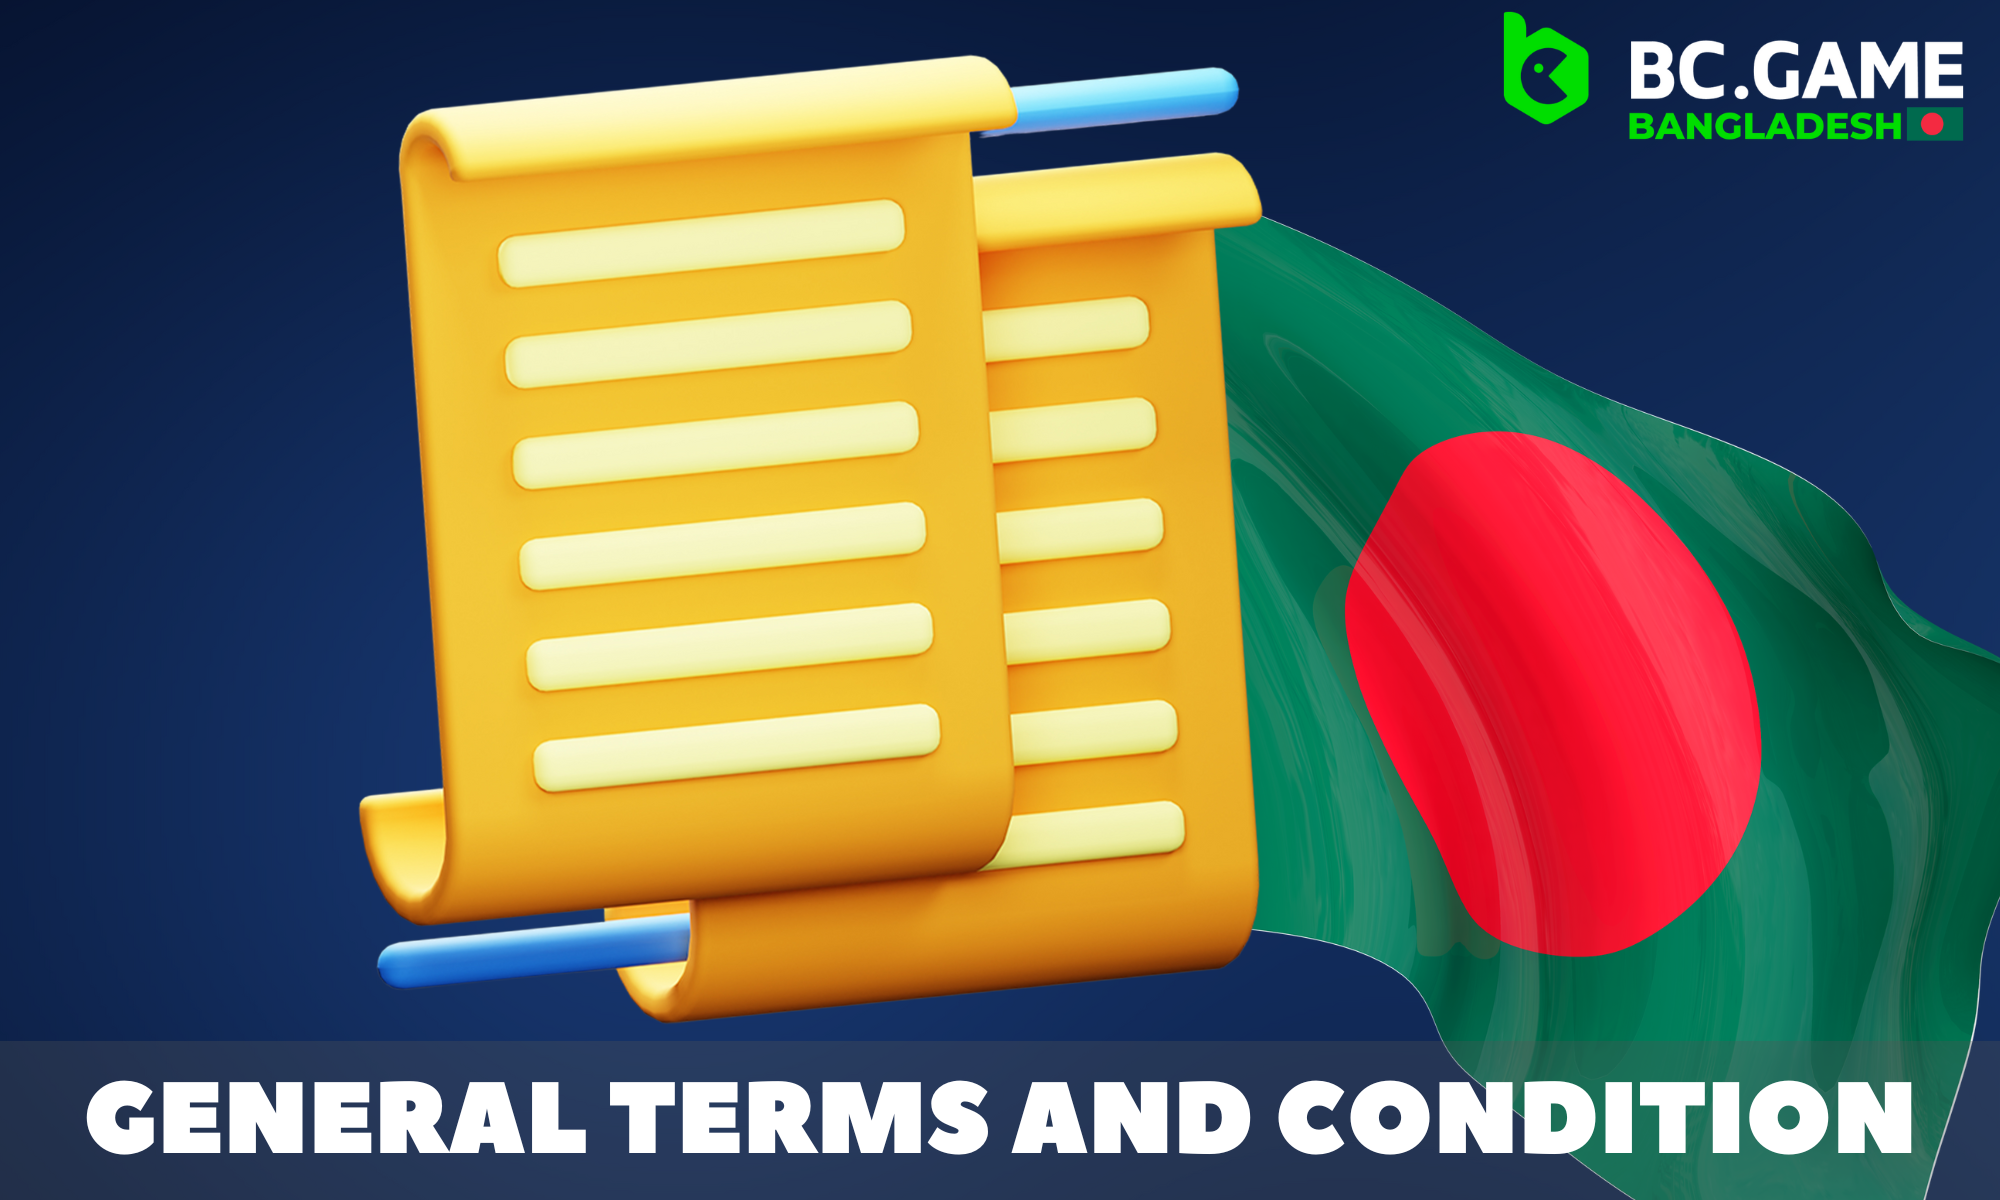 Overview of the main terms and conditions of use of the BC.GAME website